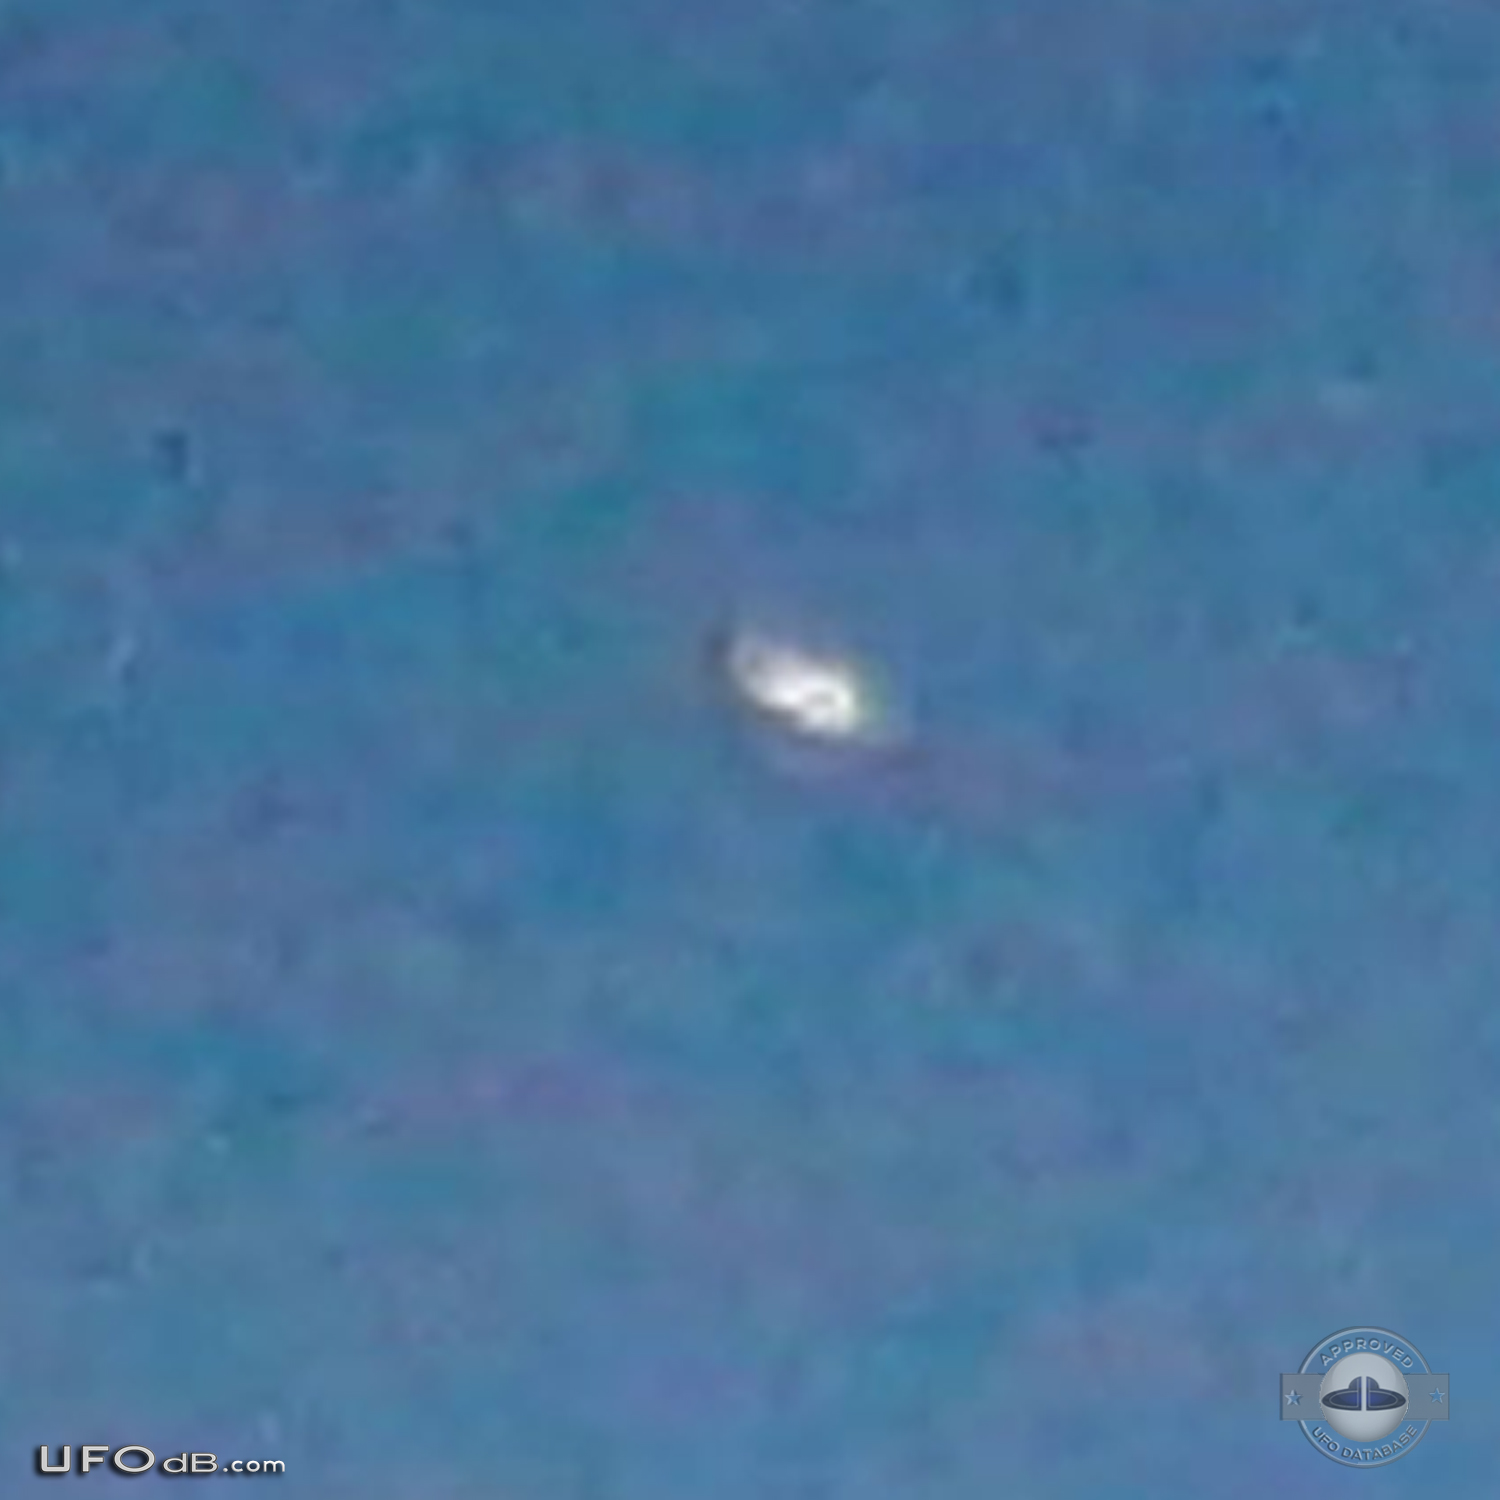 Unmoving Star turns out to be a UFO in Cooma, NSW, Australia 2012 UFO Picture #477-3